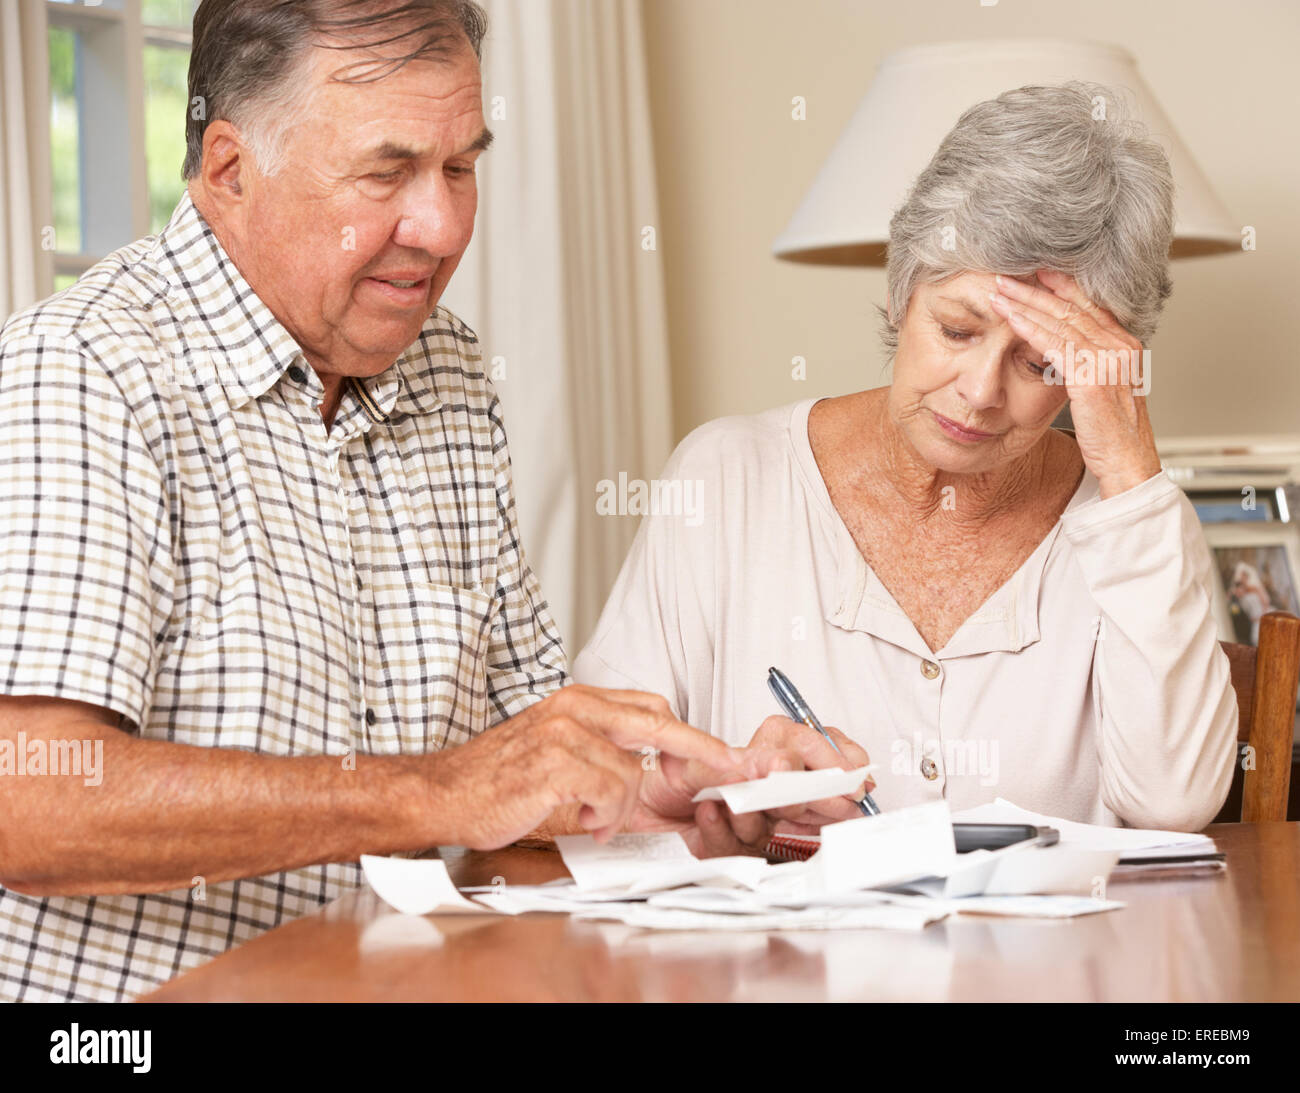 Senior Couple Concerned About Debt Going Through Bills Together Stock Photo